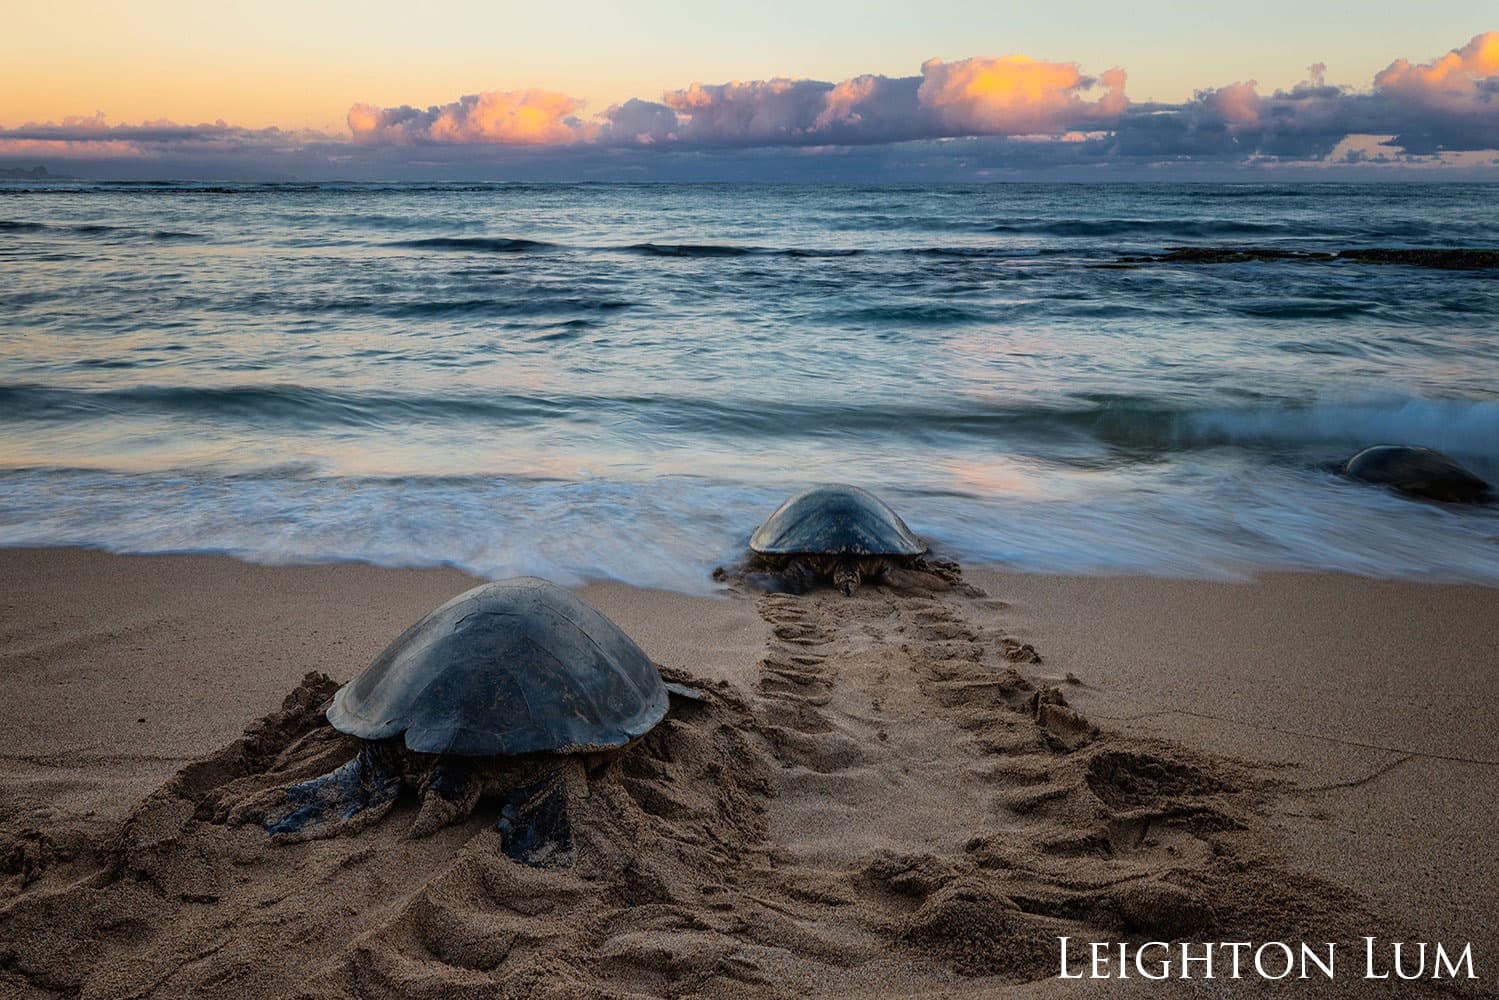 sea turtles make their way from the beach into the ocean